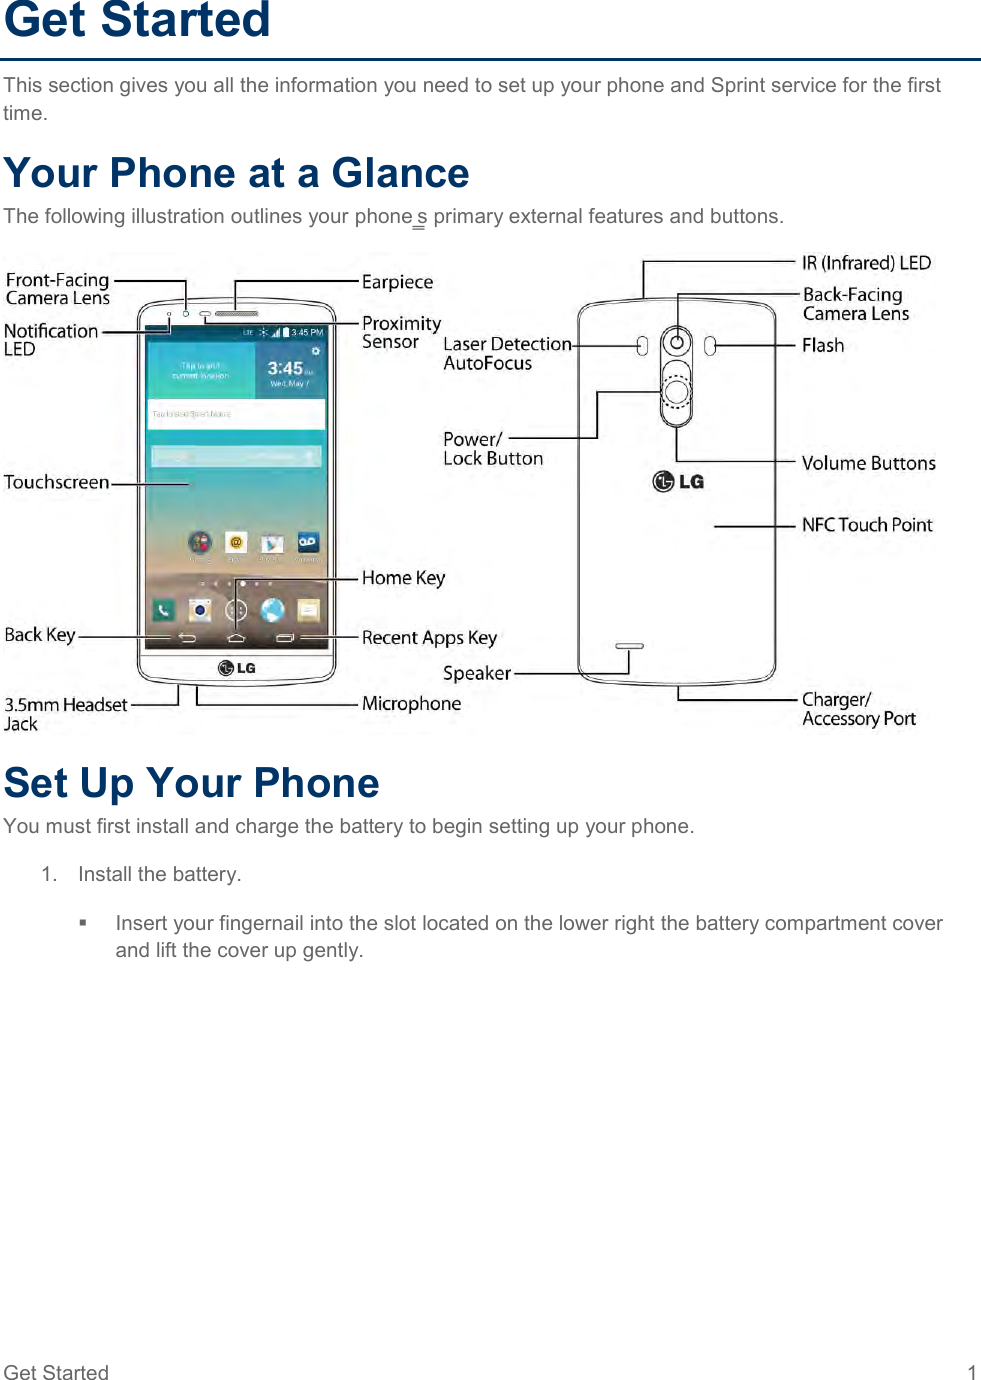 Get Started  1 Get Started This section gives you all the information you need to set up your phone and Sprint service for the first time. Your Phone at a Glance The following illustration outlines your phone‗s primary external features and buttons.  Set Up Your Phone You must first install and charge the battery to begin setting up your phone. 1.  Install the battery.   Insert your fingernail into the slot located on the lower right the battery compartment cover and lift the cover up gently. 